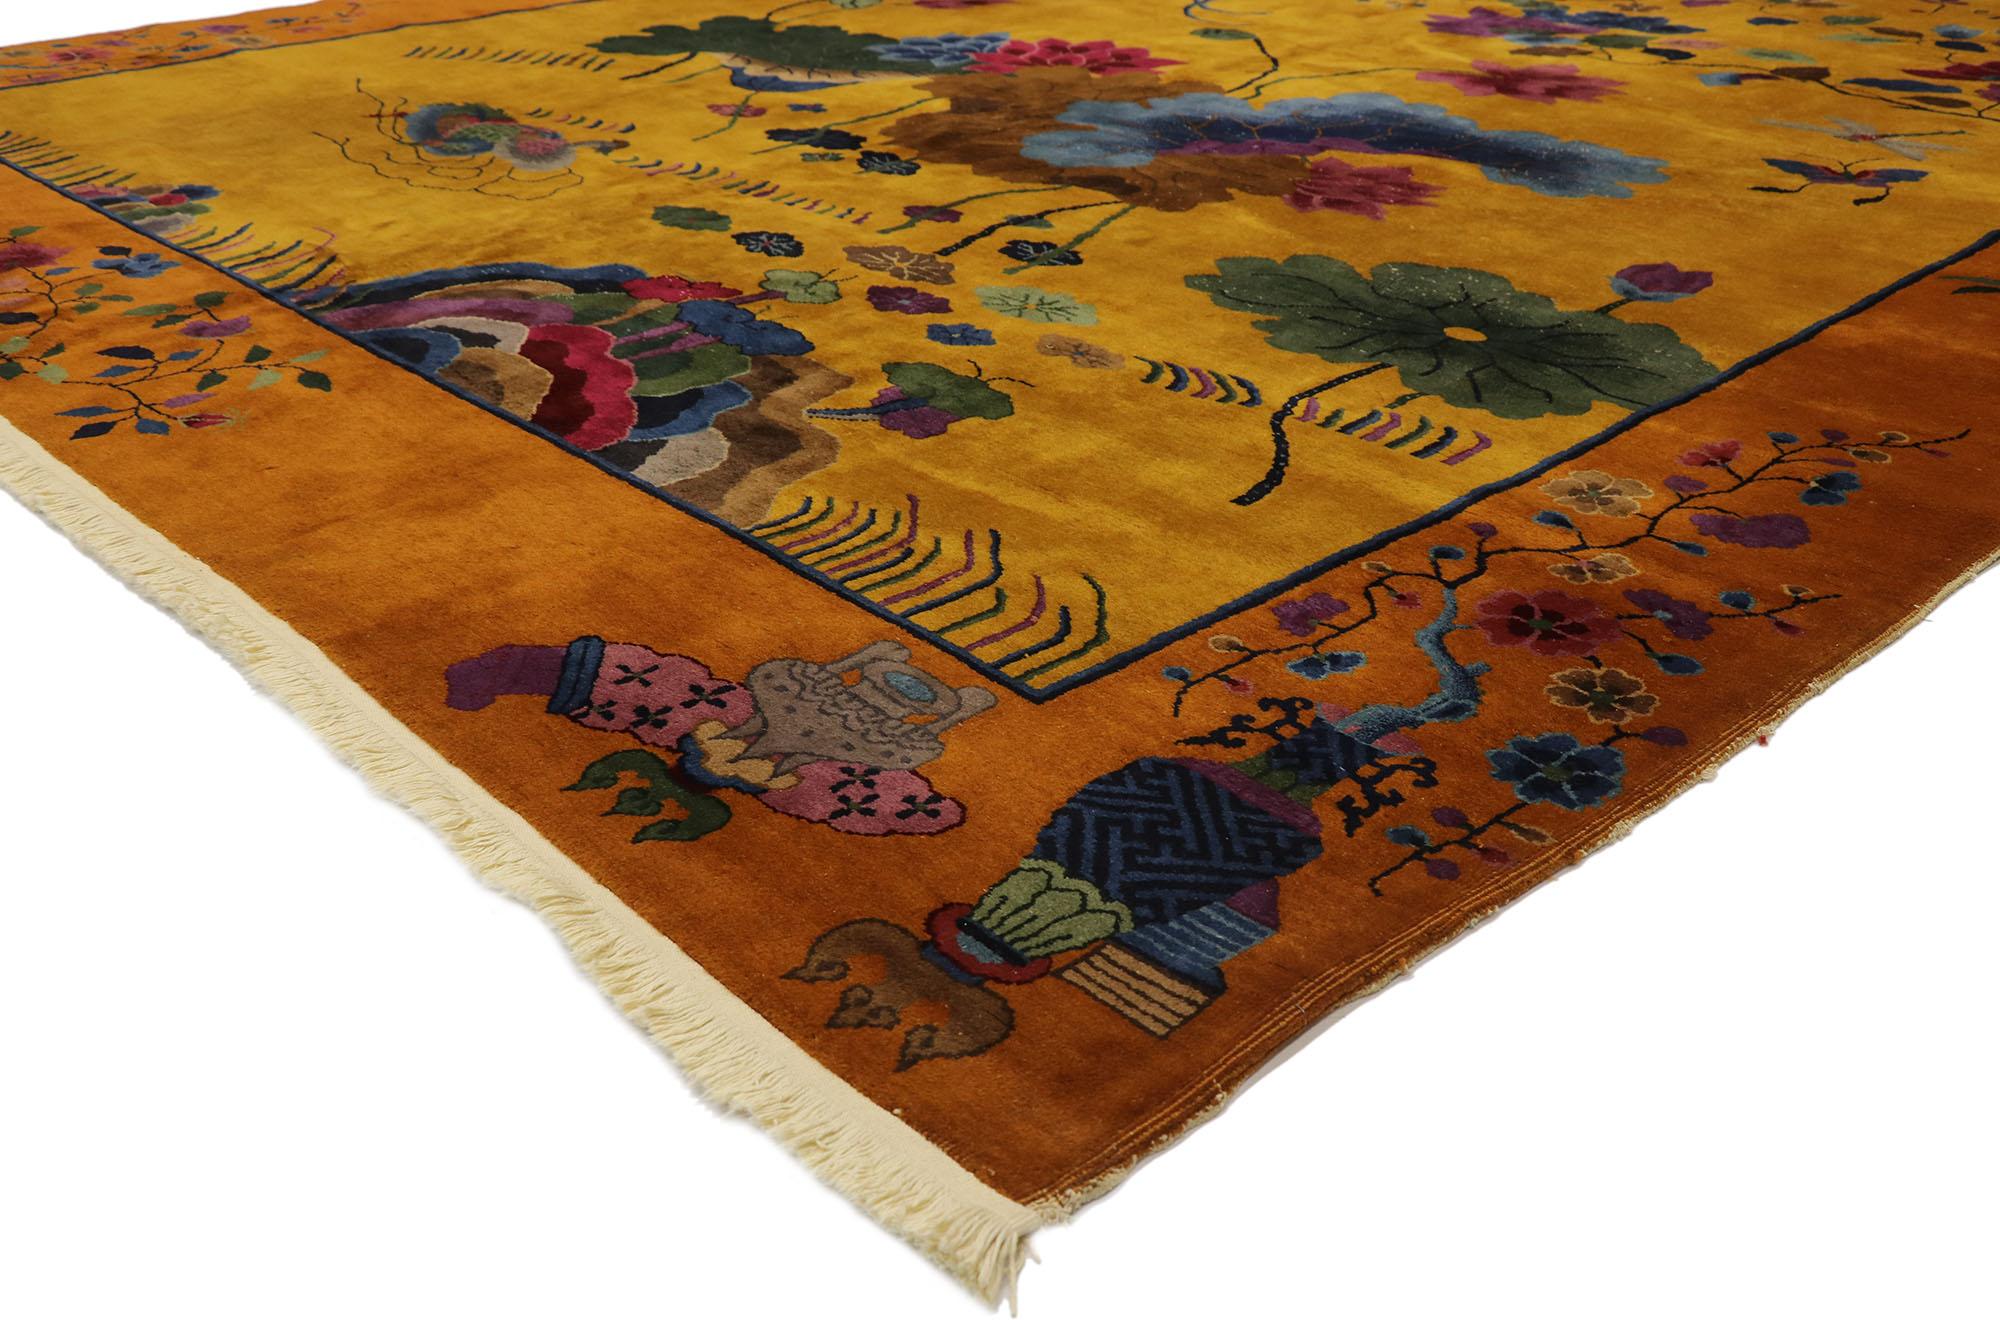 77434, antique Chinese Pictorial Rug with Art Deco style 10'00 x 13'04. This hand knotted wool antique Chinese Art Deco style rug features a gorgeous pictorial plum tree design set against an abrashed field. The plum tree is depicted in peak bloom